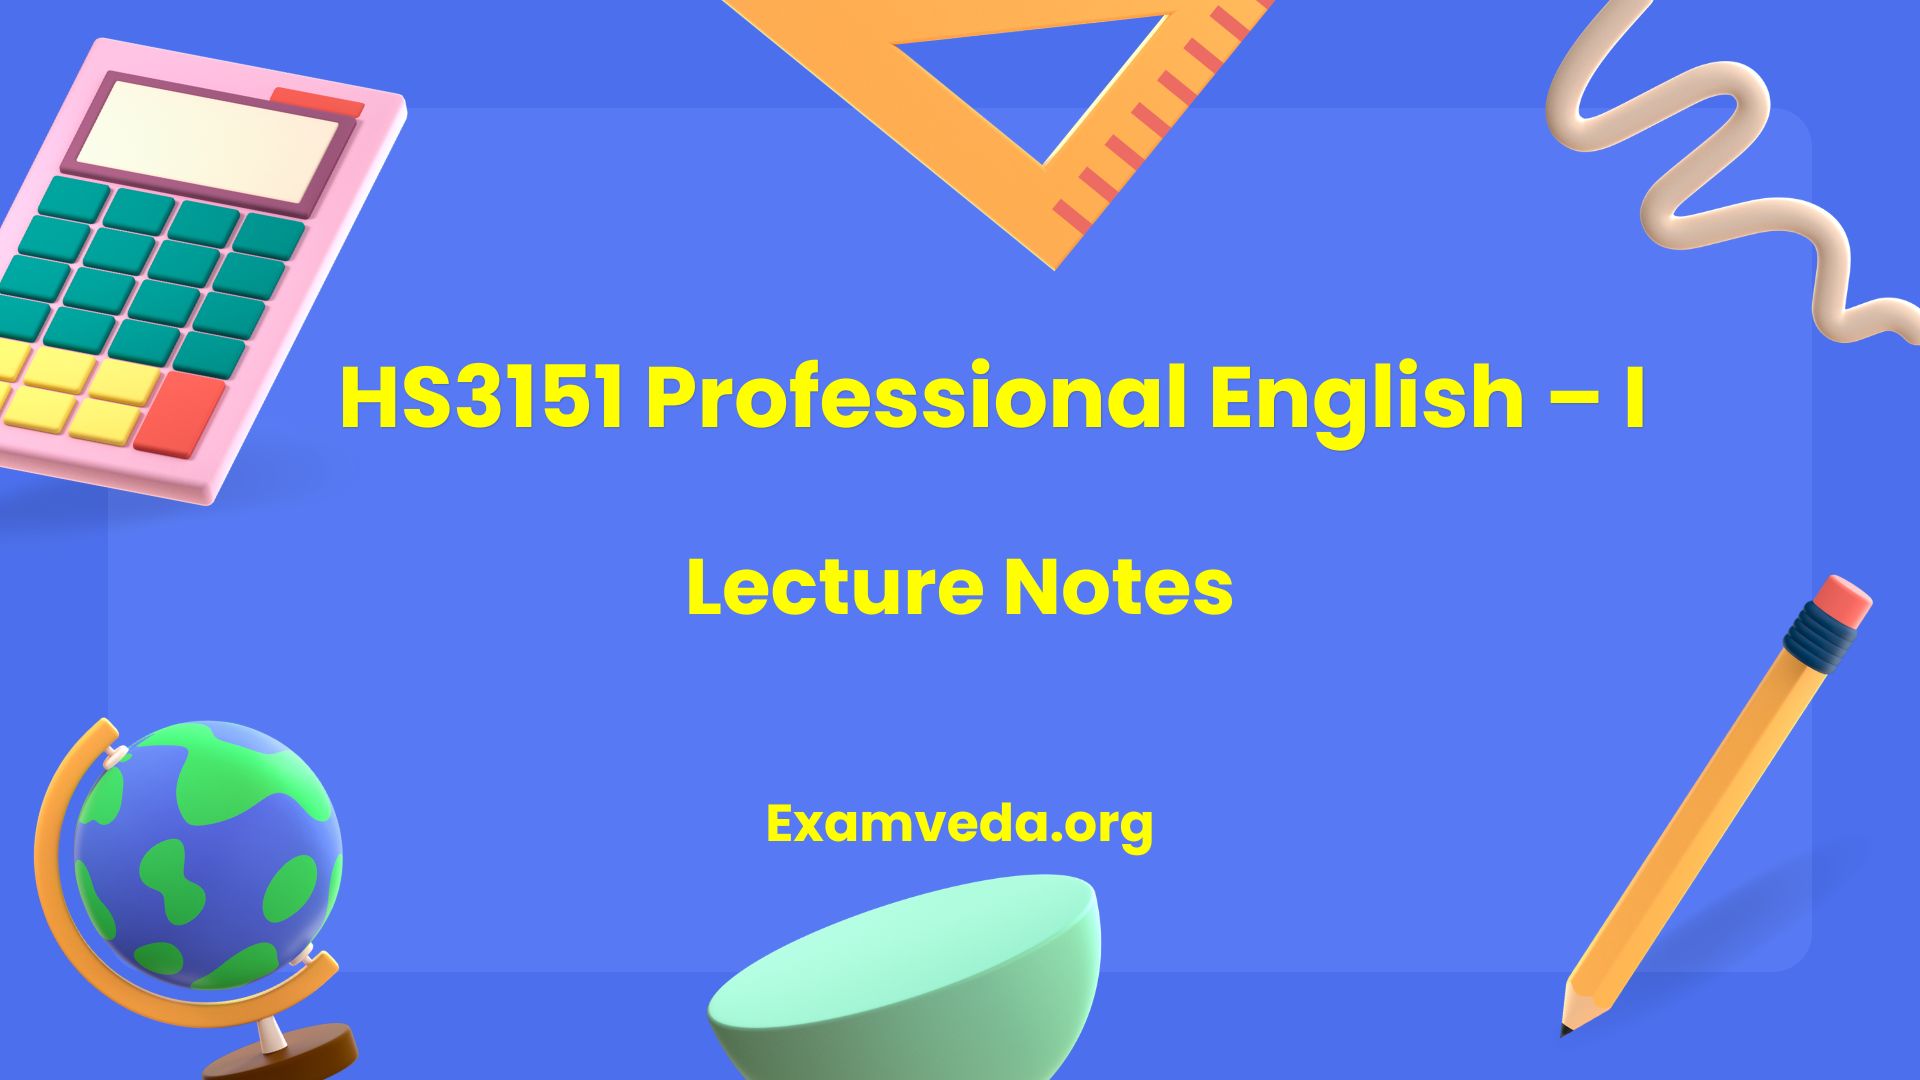 HS3151 Professional English – I Lecture Notes